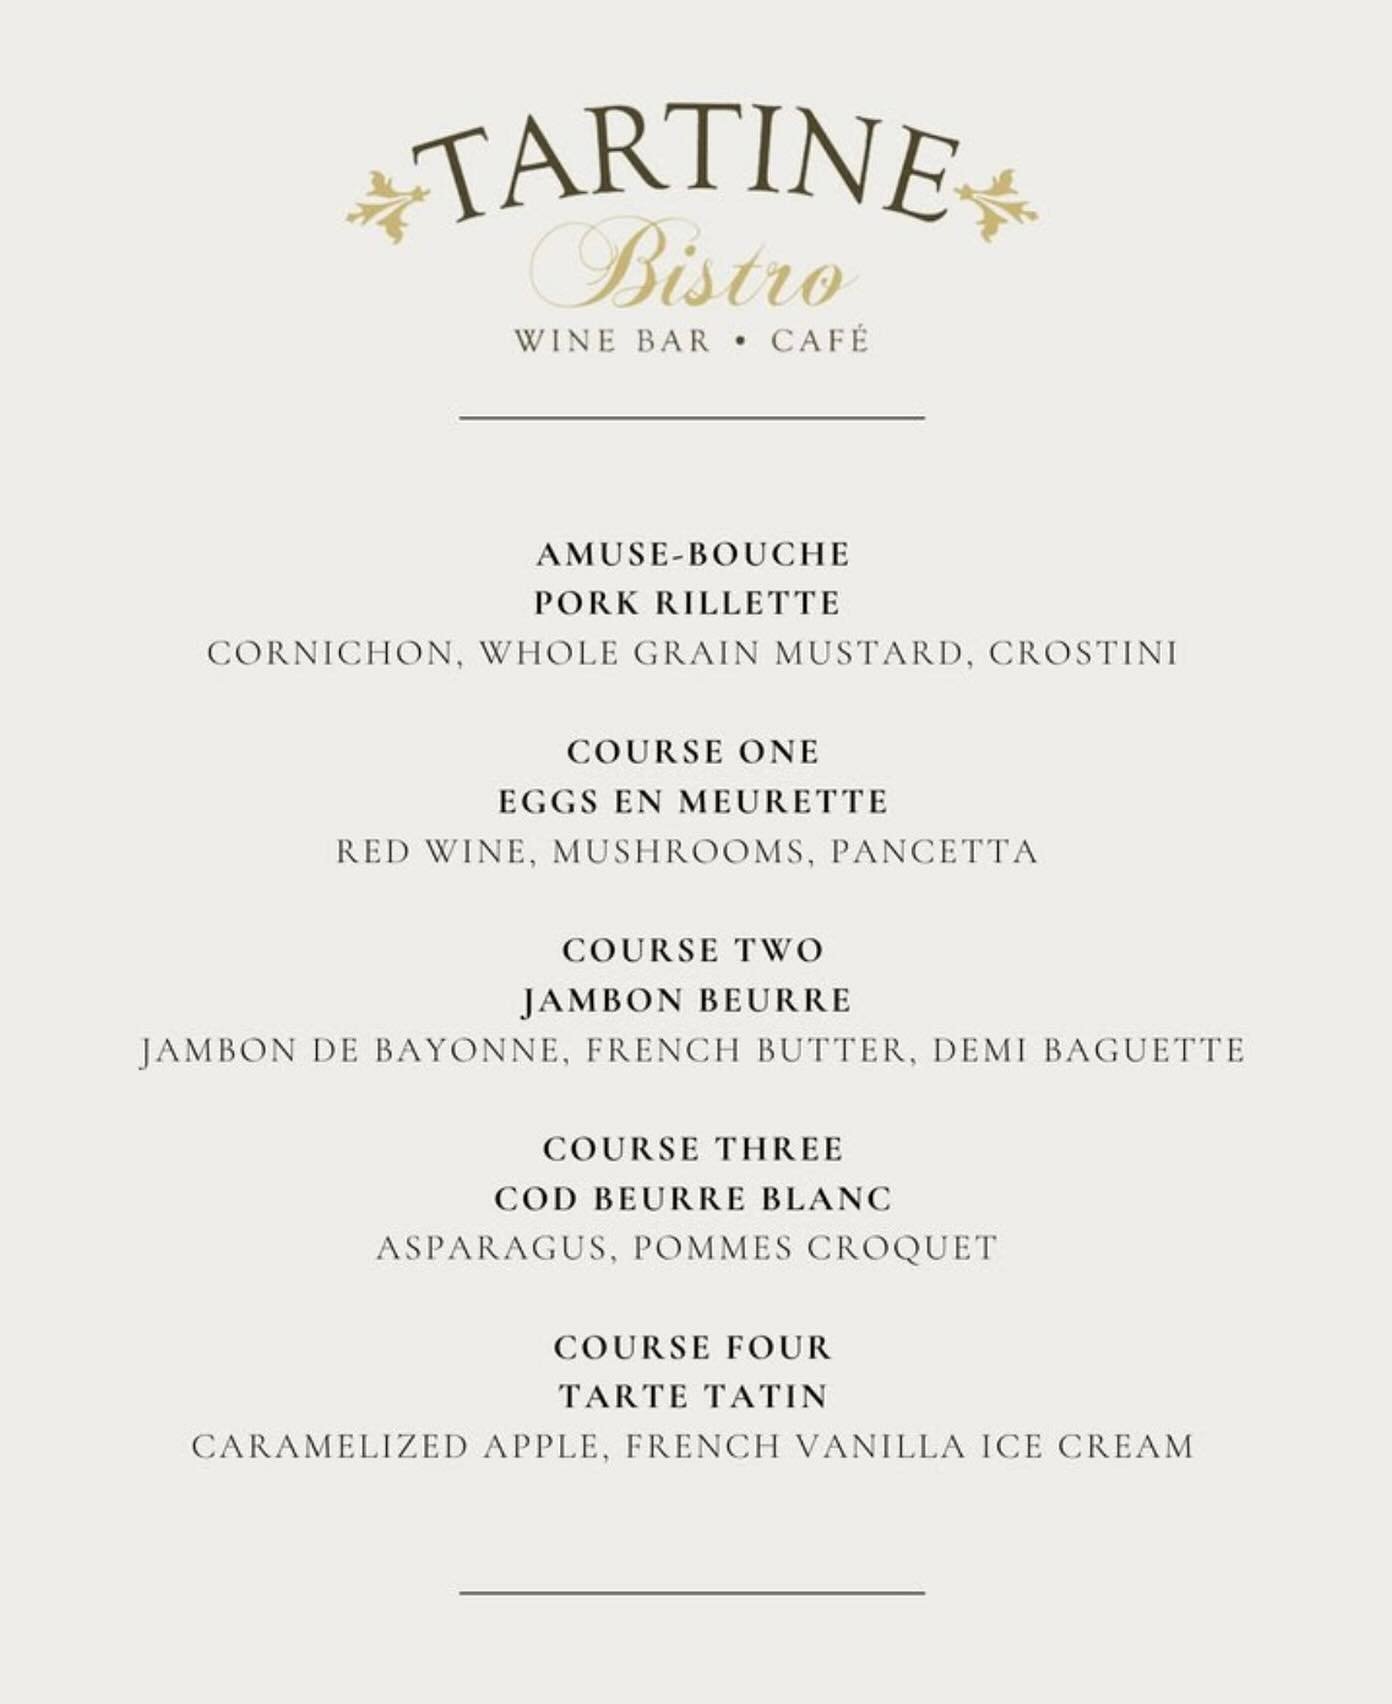 Tartine Bistro Presents&hellip;
An evening with Adobe Road Winery Featuring &ldquo;The Racing Series&rdquo; wines and Wine Maker Garett Martin!
Friday June 7th @ 7pm | 5 courses | 5 wines | $125 (tax and gratuity additional)

Looking to fuel your pas